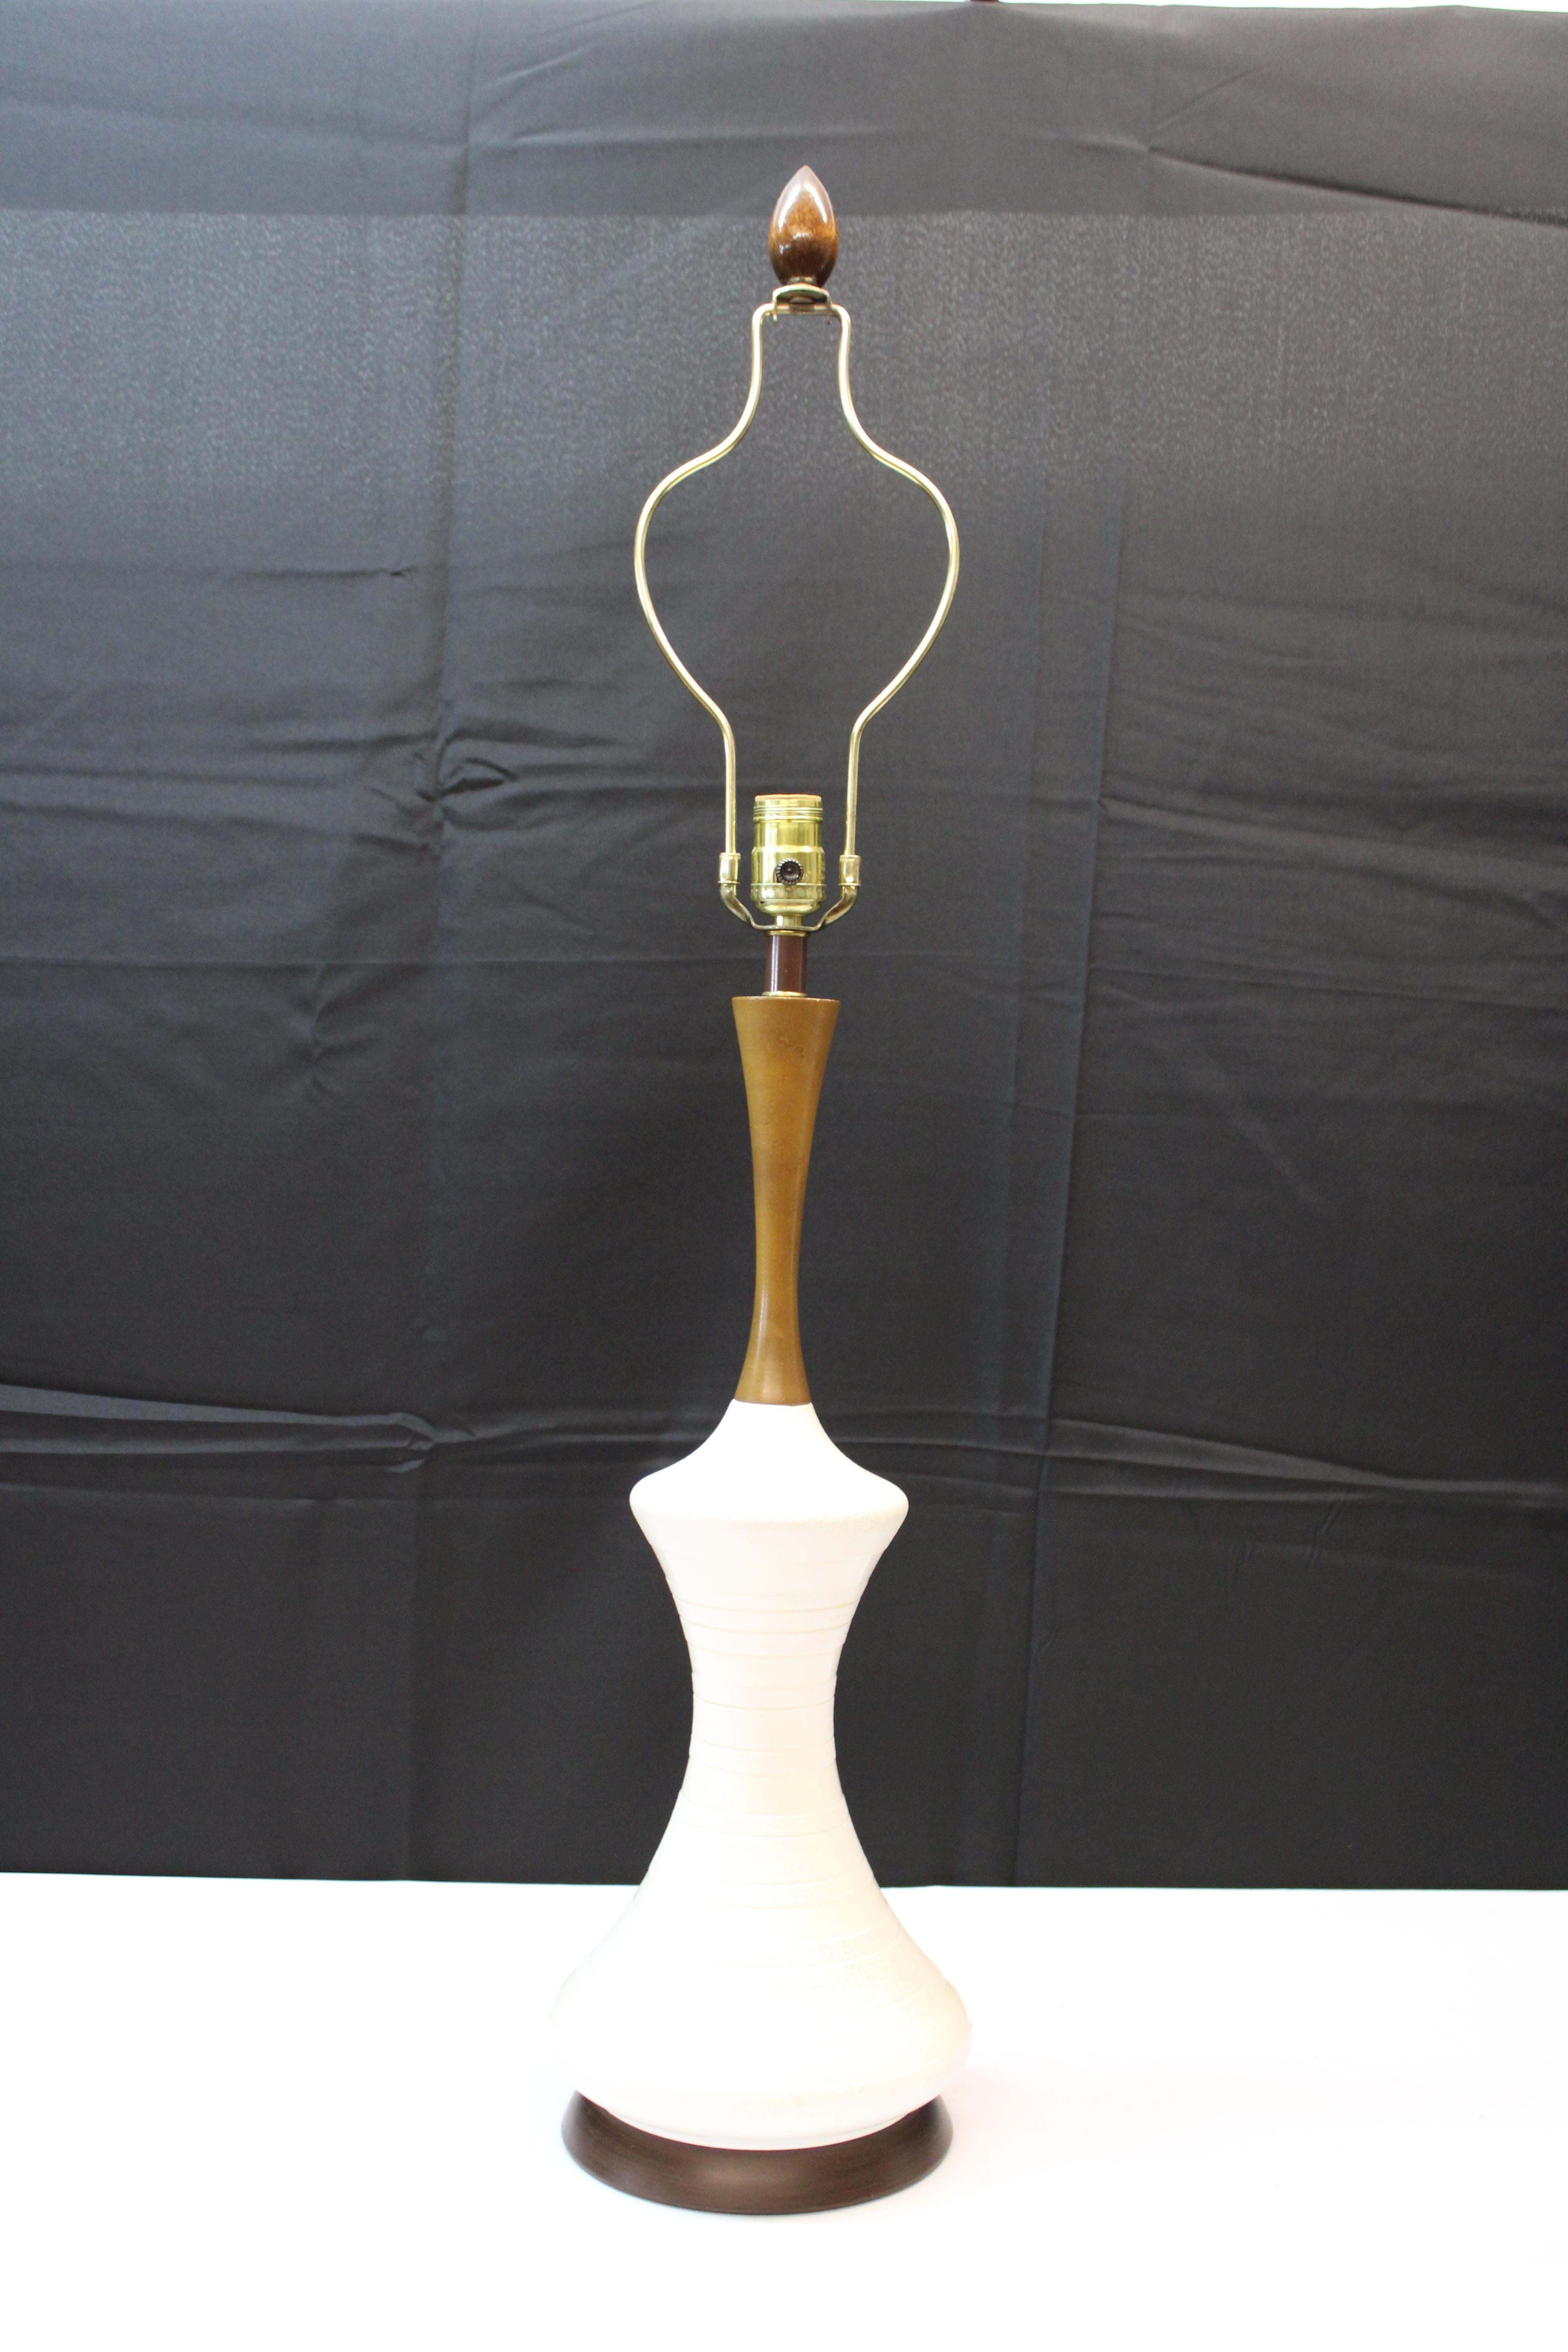 Other Pr Mid-Century Textured Ceramic Hourglass Shaped Lamps with Wood Finials For Sale